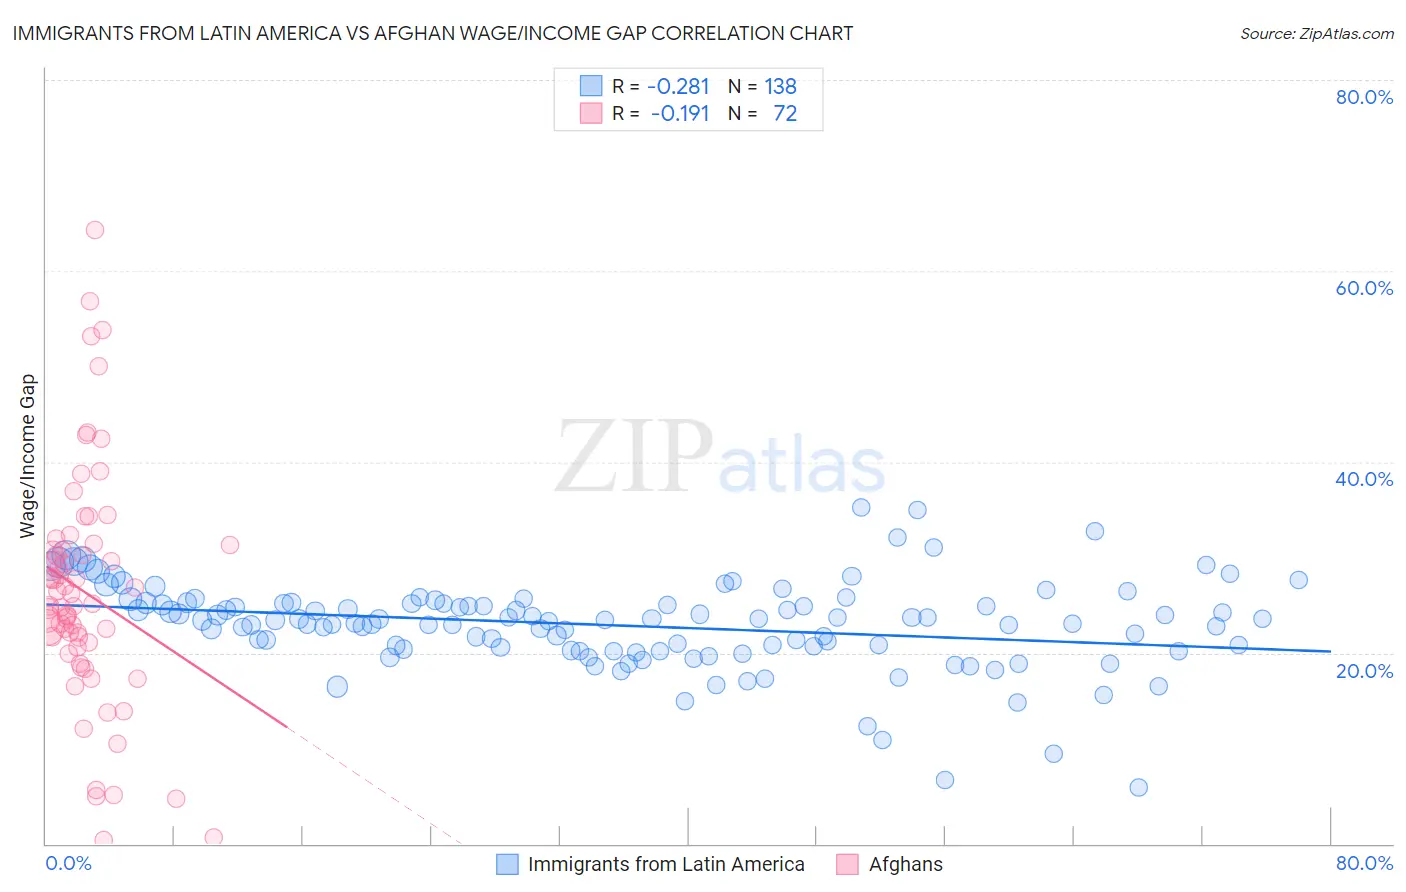 Immigrants from Latin America vs Afghan Wage/Income Gap